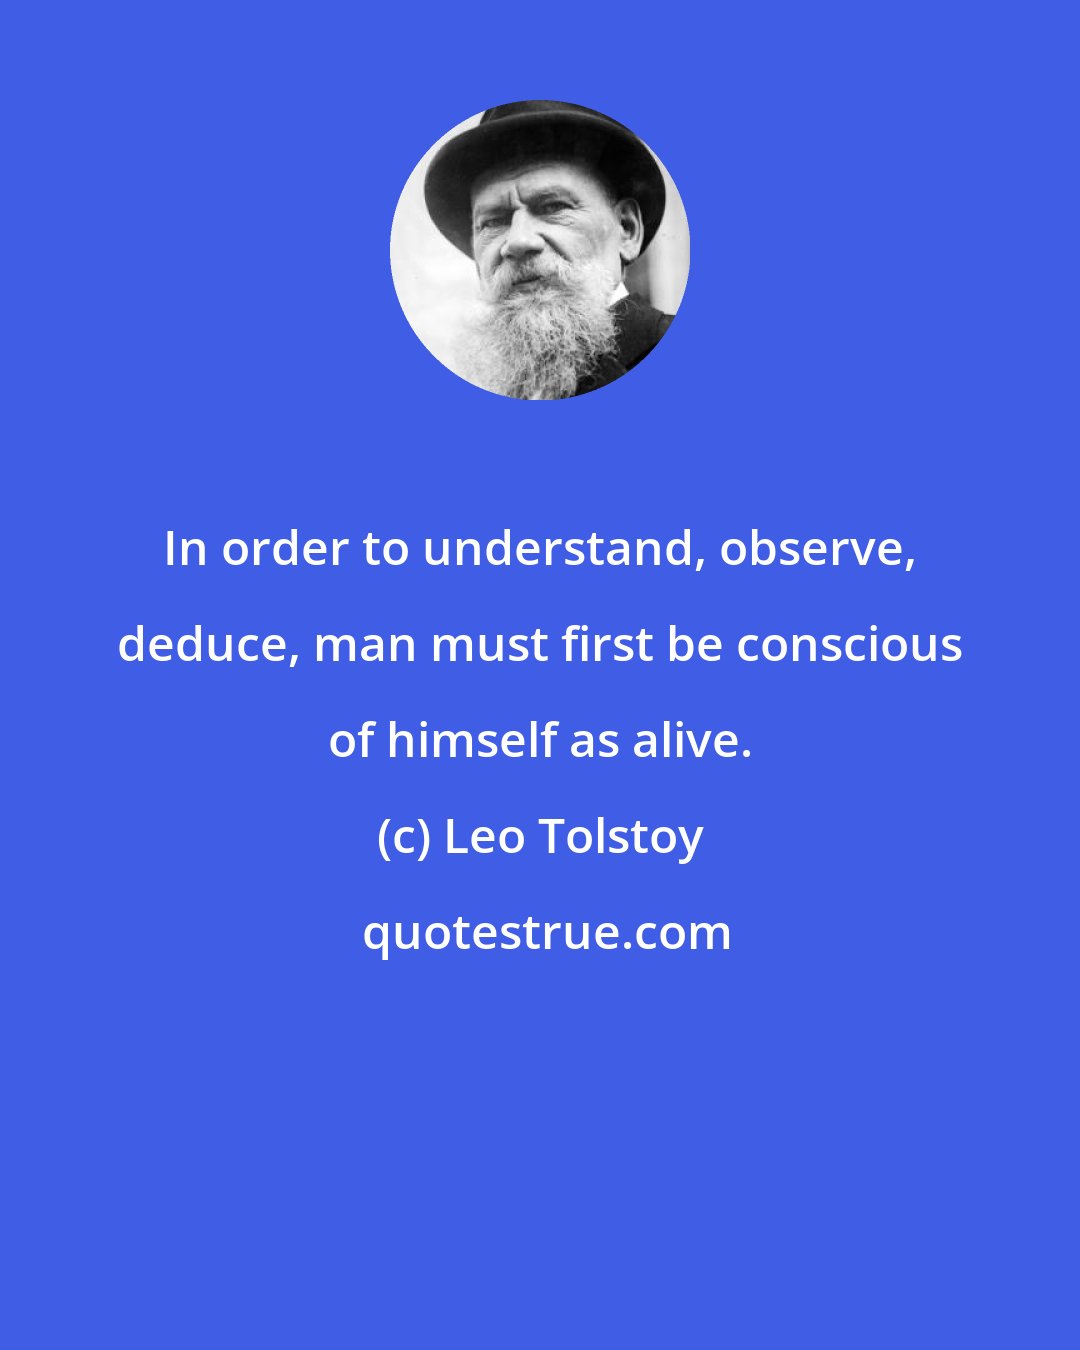 Leo Tolstoy: In order to understand, observe, deduce, man must first be conscious of himself as alive.